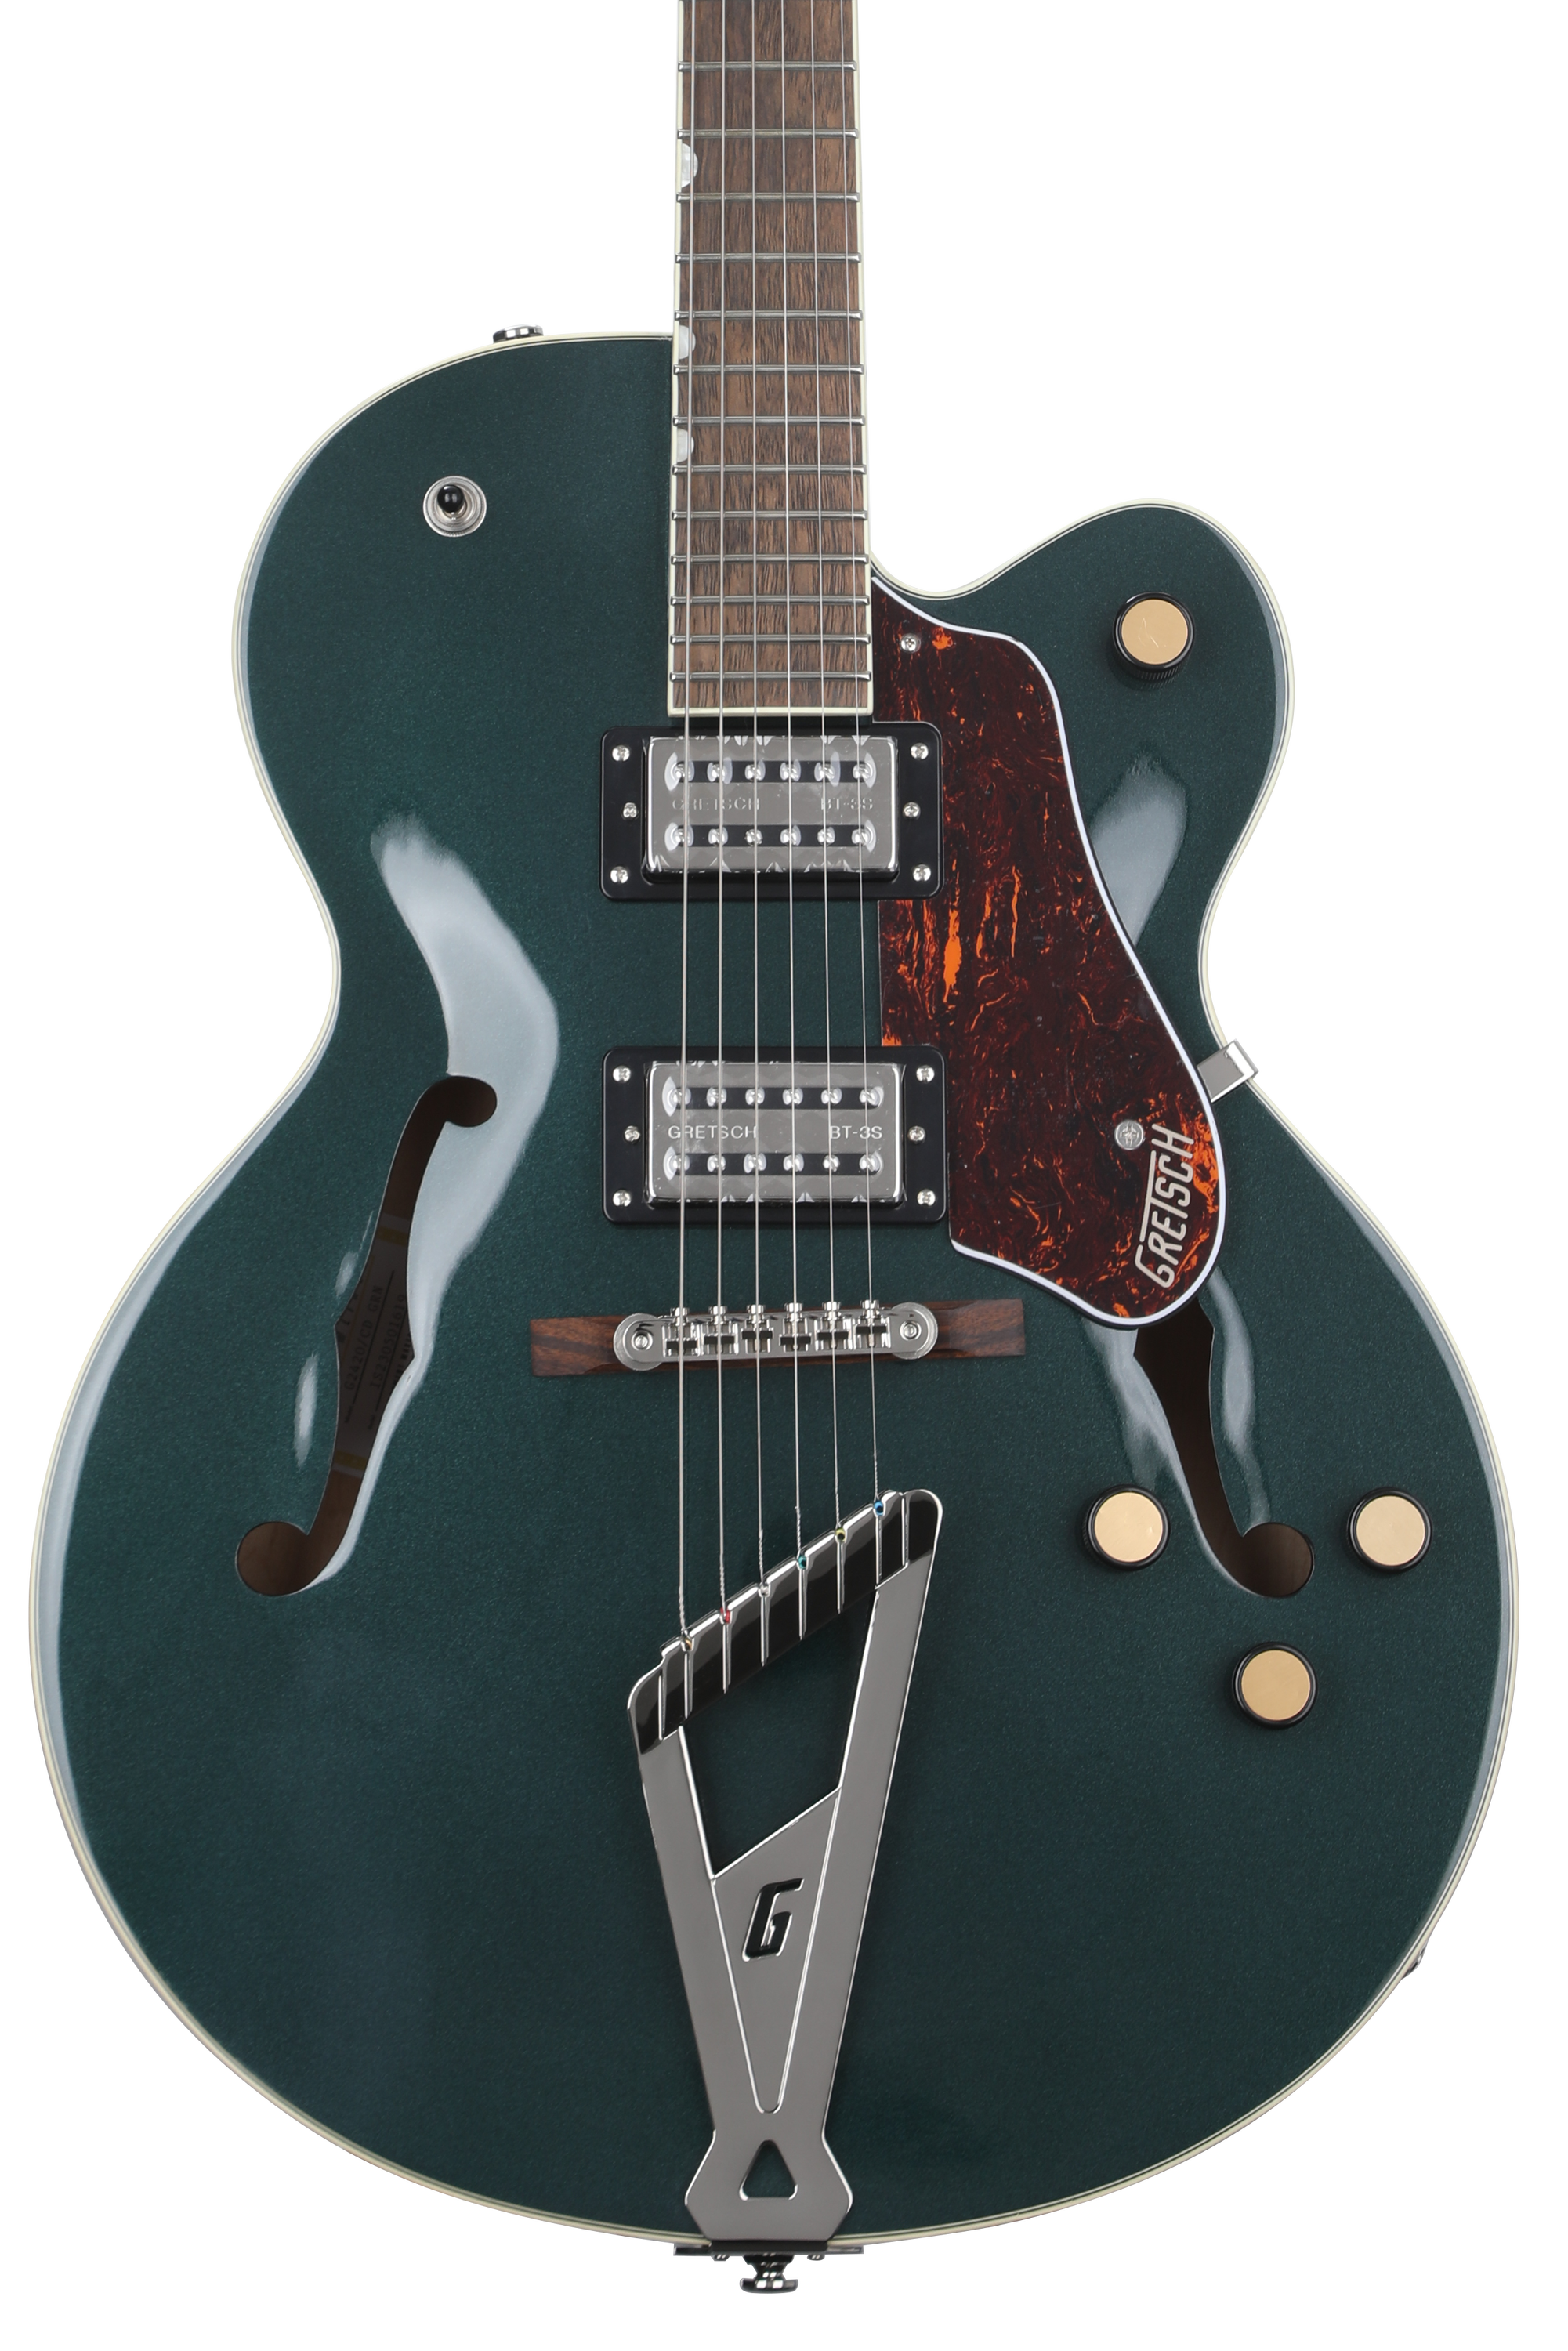 Gretsch G2420 Streamliner Hollowbody Electric Guitar with